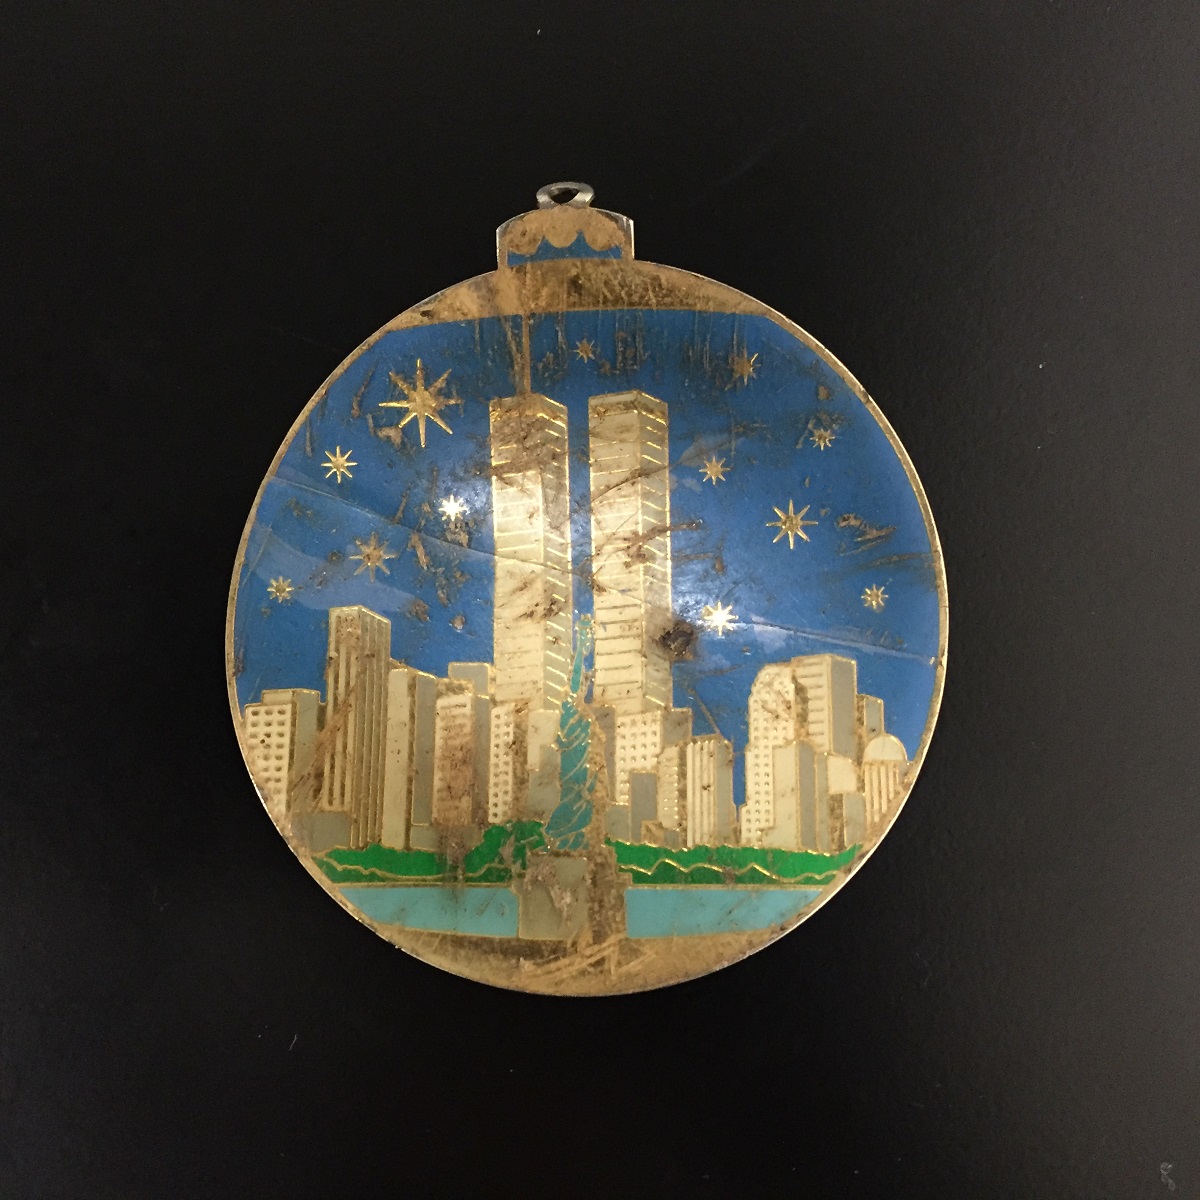 An ornament recovered at Ground Zero is displayed on a black surface. The ornament depicts the Twin Towers on a starry night.